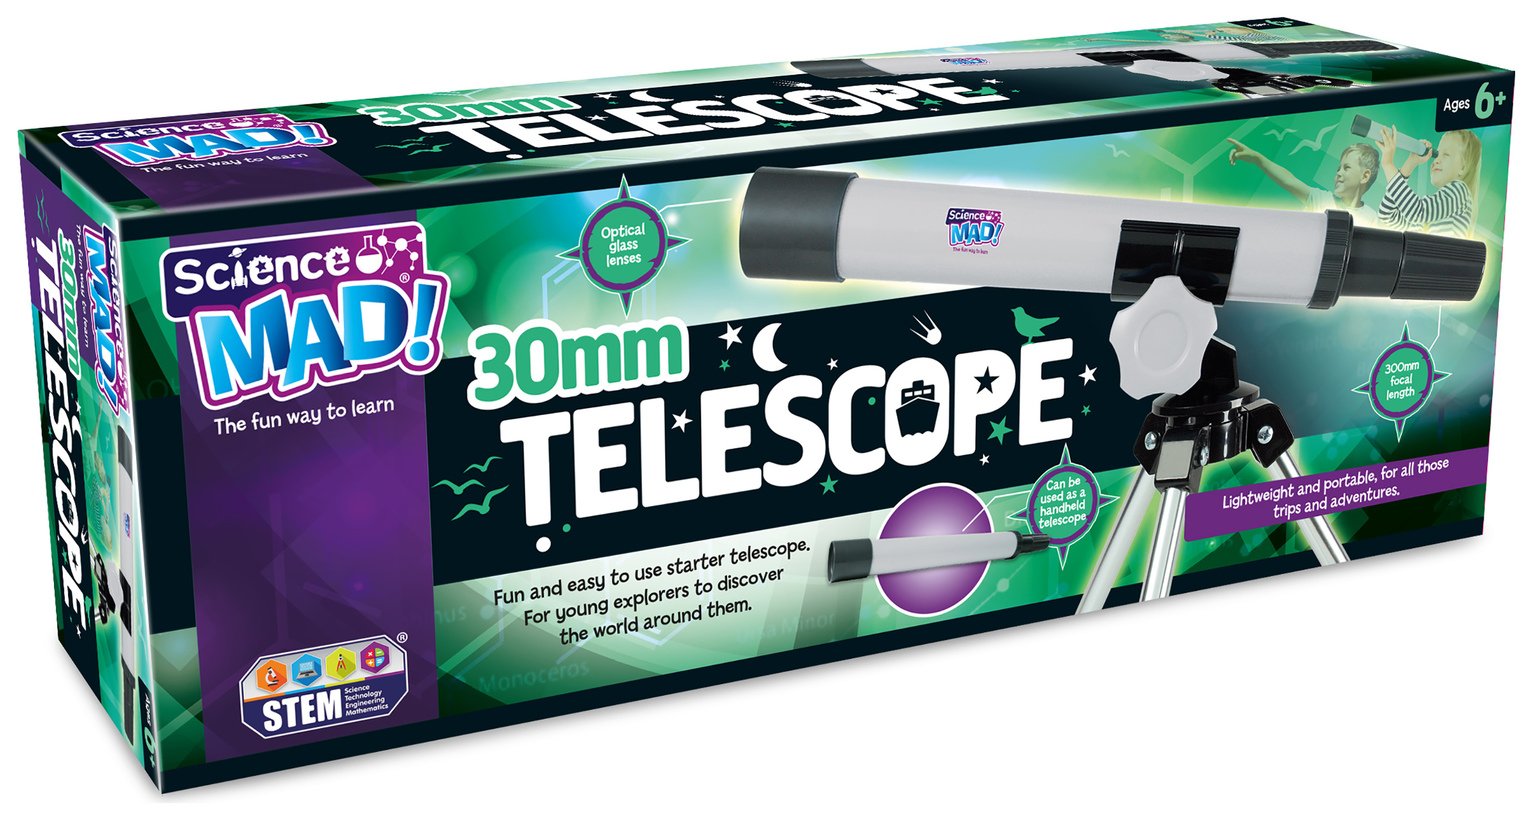 Science Mad 30mm Telescope with Tripod